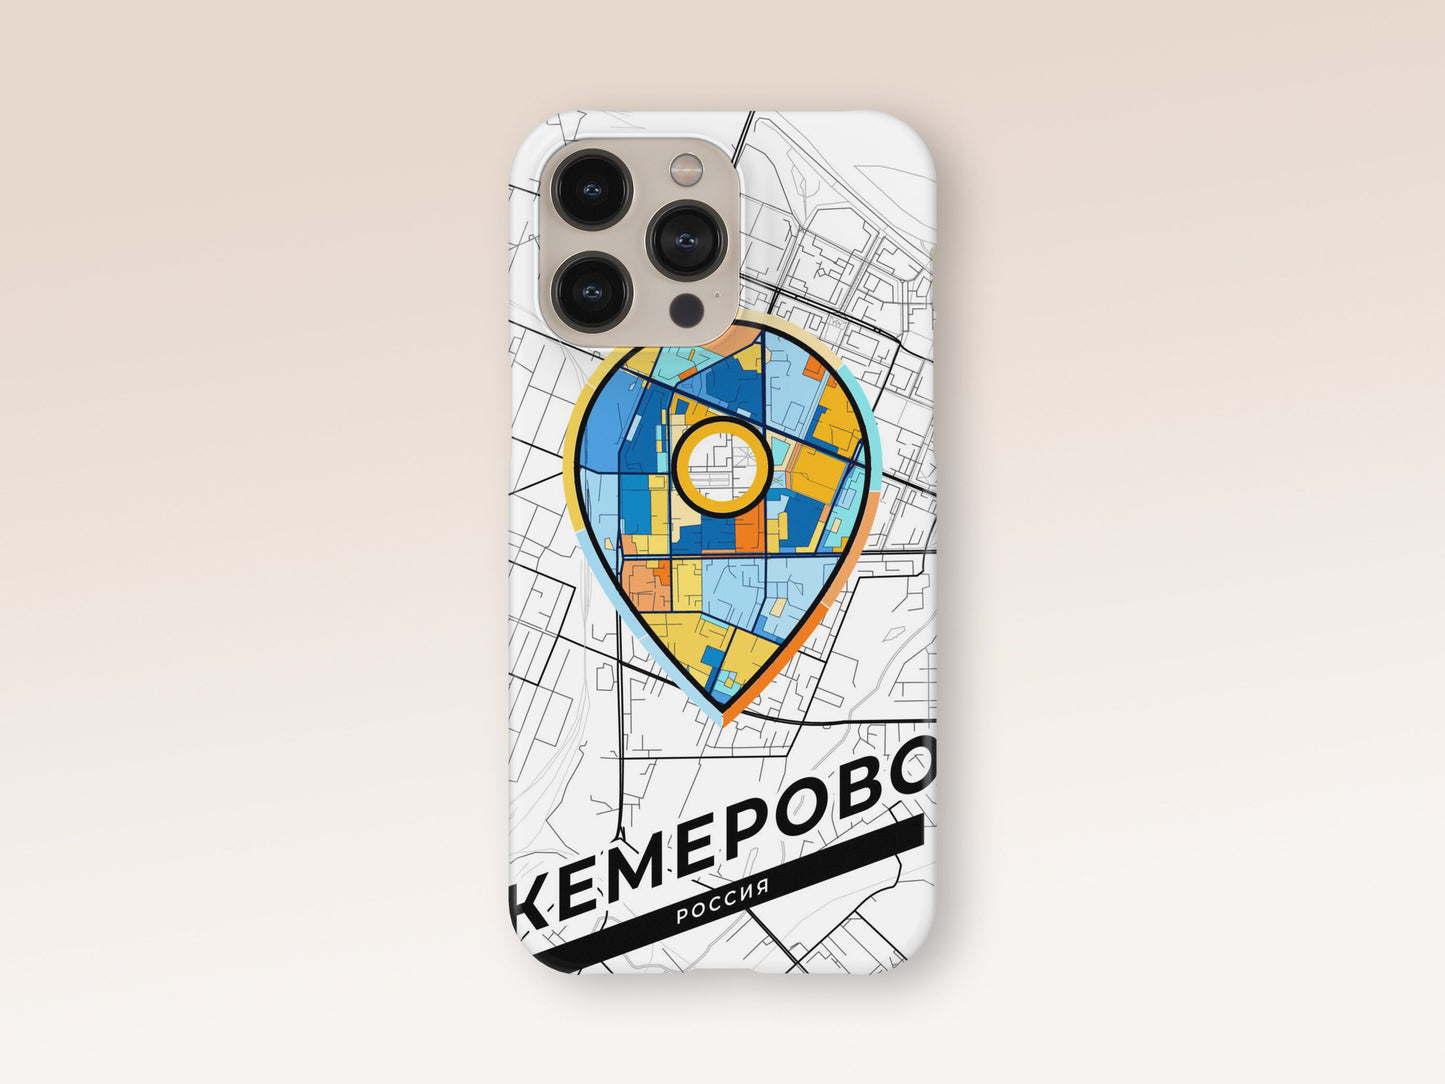 Kemerovo Russia slim phone case with colorful icon. Birthday, wedding or housewarming gift. Couple match cases. 1